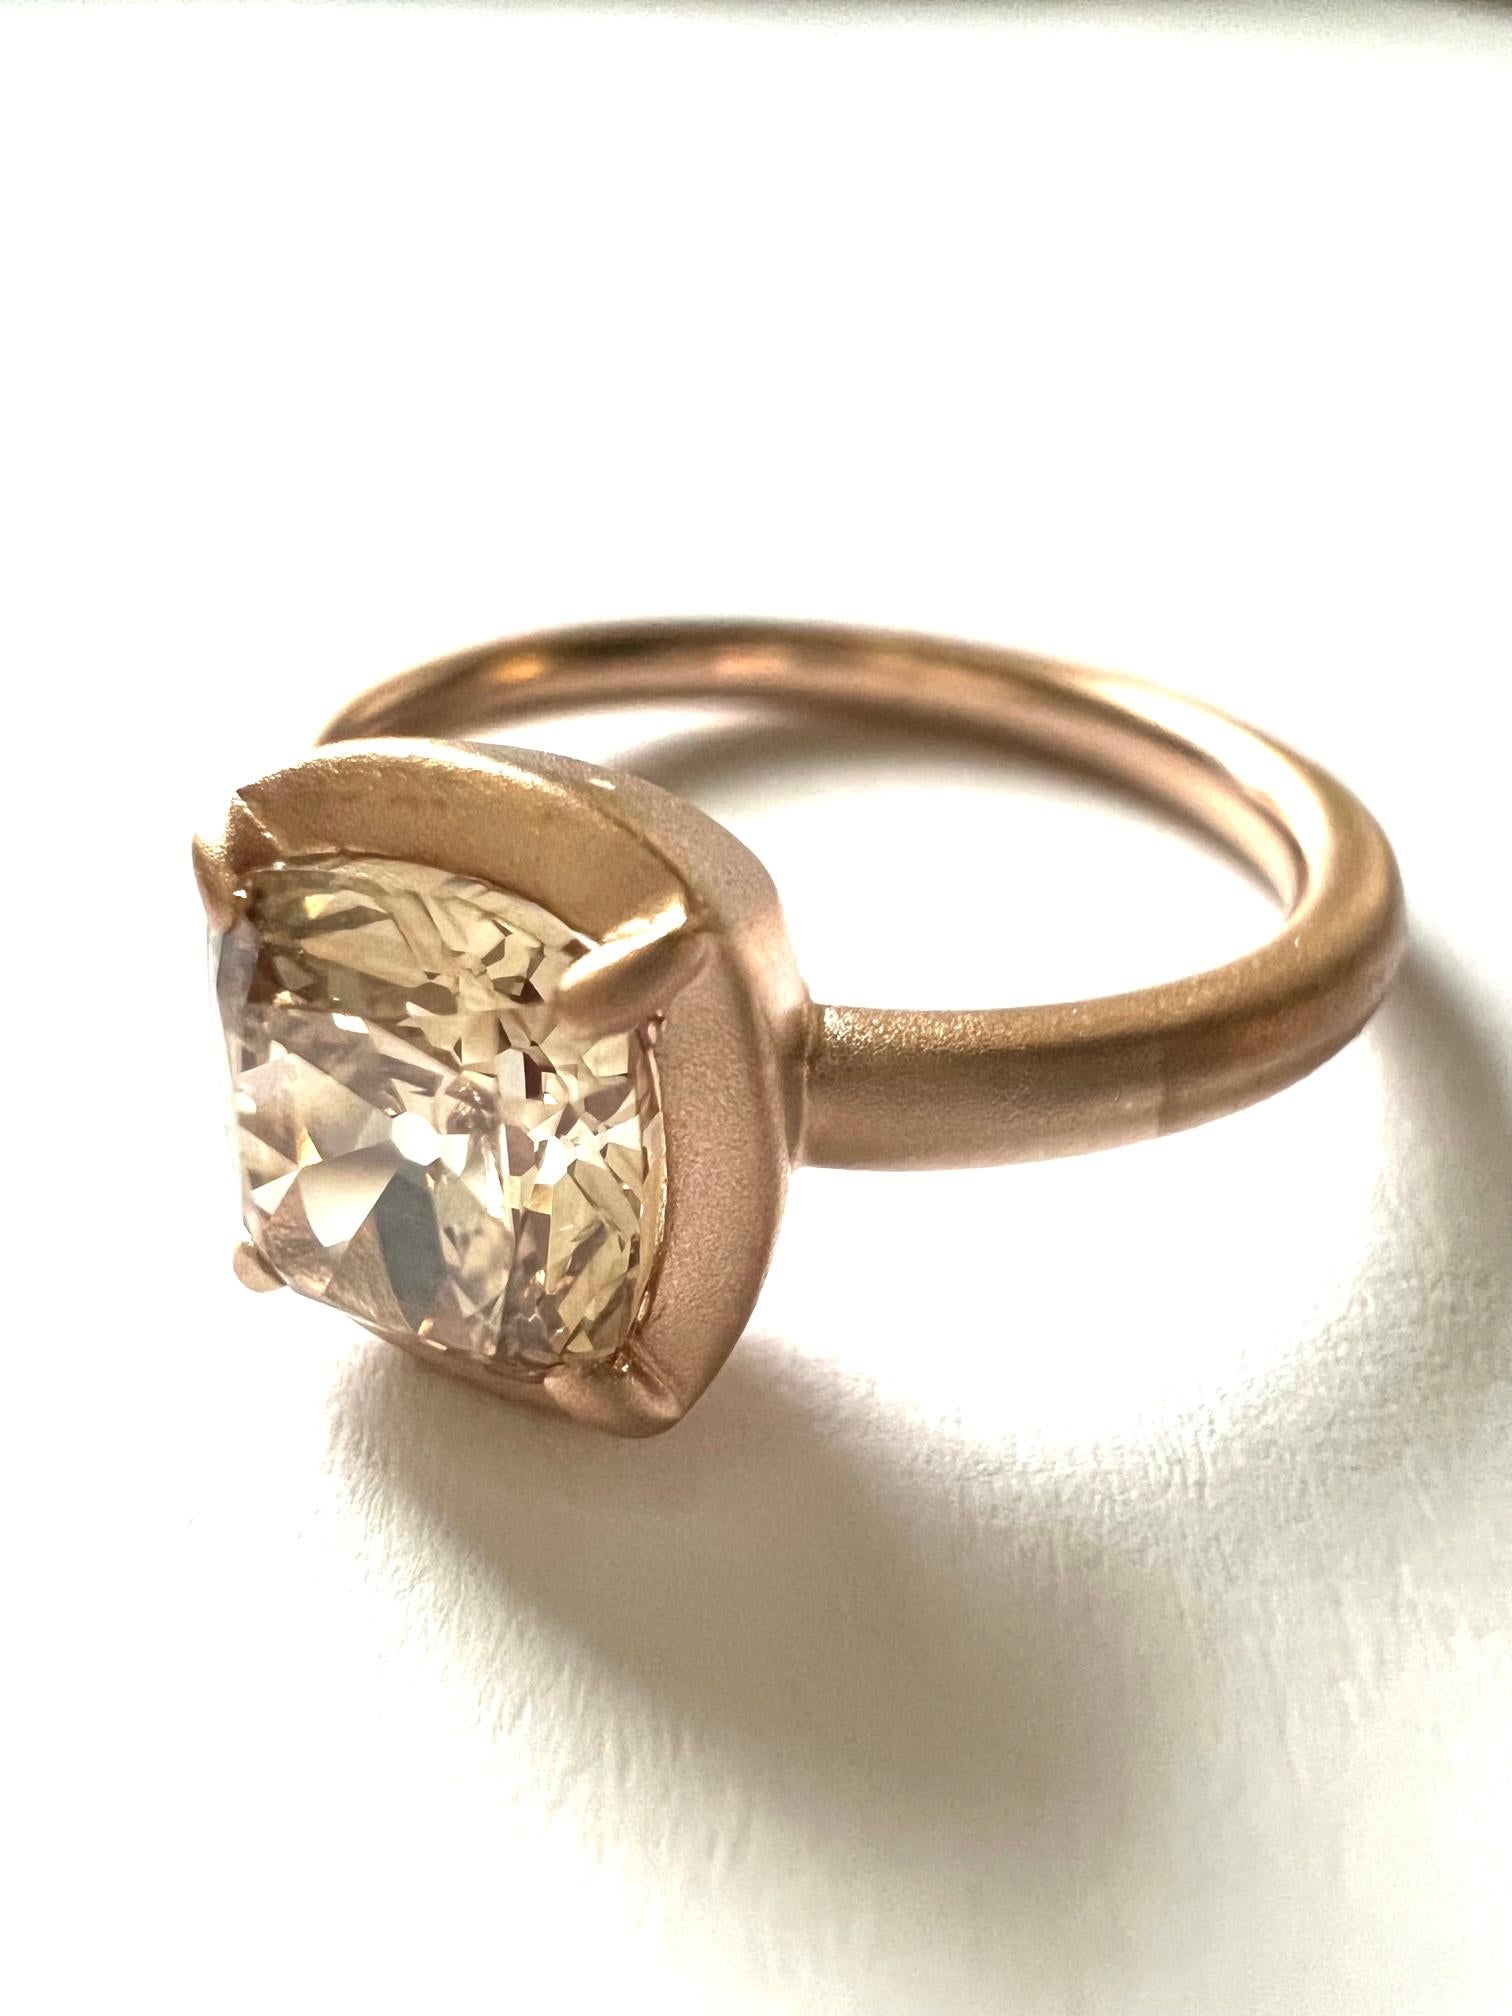 1 Ring in 750/ Red Gold, set with 1x Diamond (cushion, antique-cut, VS2, 1.16ct).

This stone is antique inspired with a very deep, impactful color saturation with a shade of brown that is of a cognac or chocolate tone. The diamond has a high crown